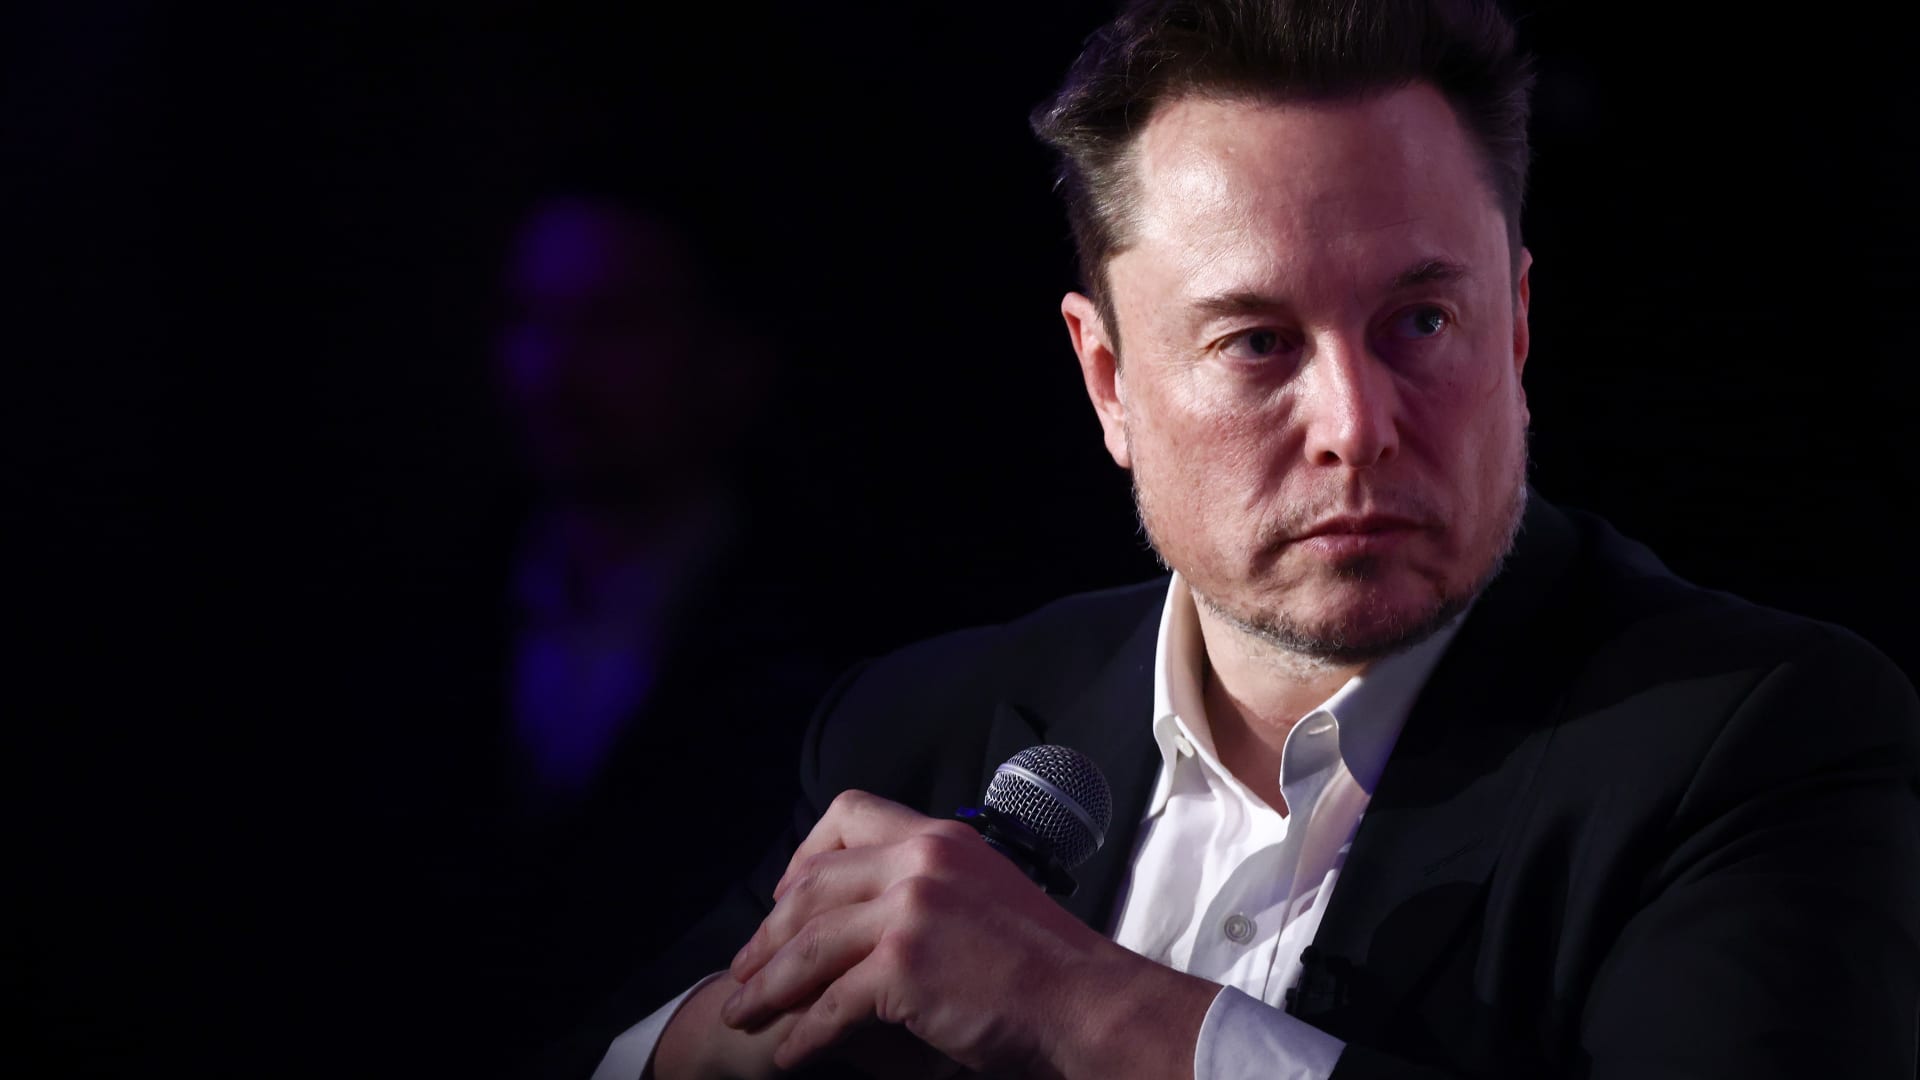 Musk's OpenAI lawsuit is 'good advertisement for the benefit of Elon Musk' but may have little legal merit